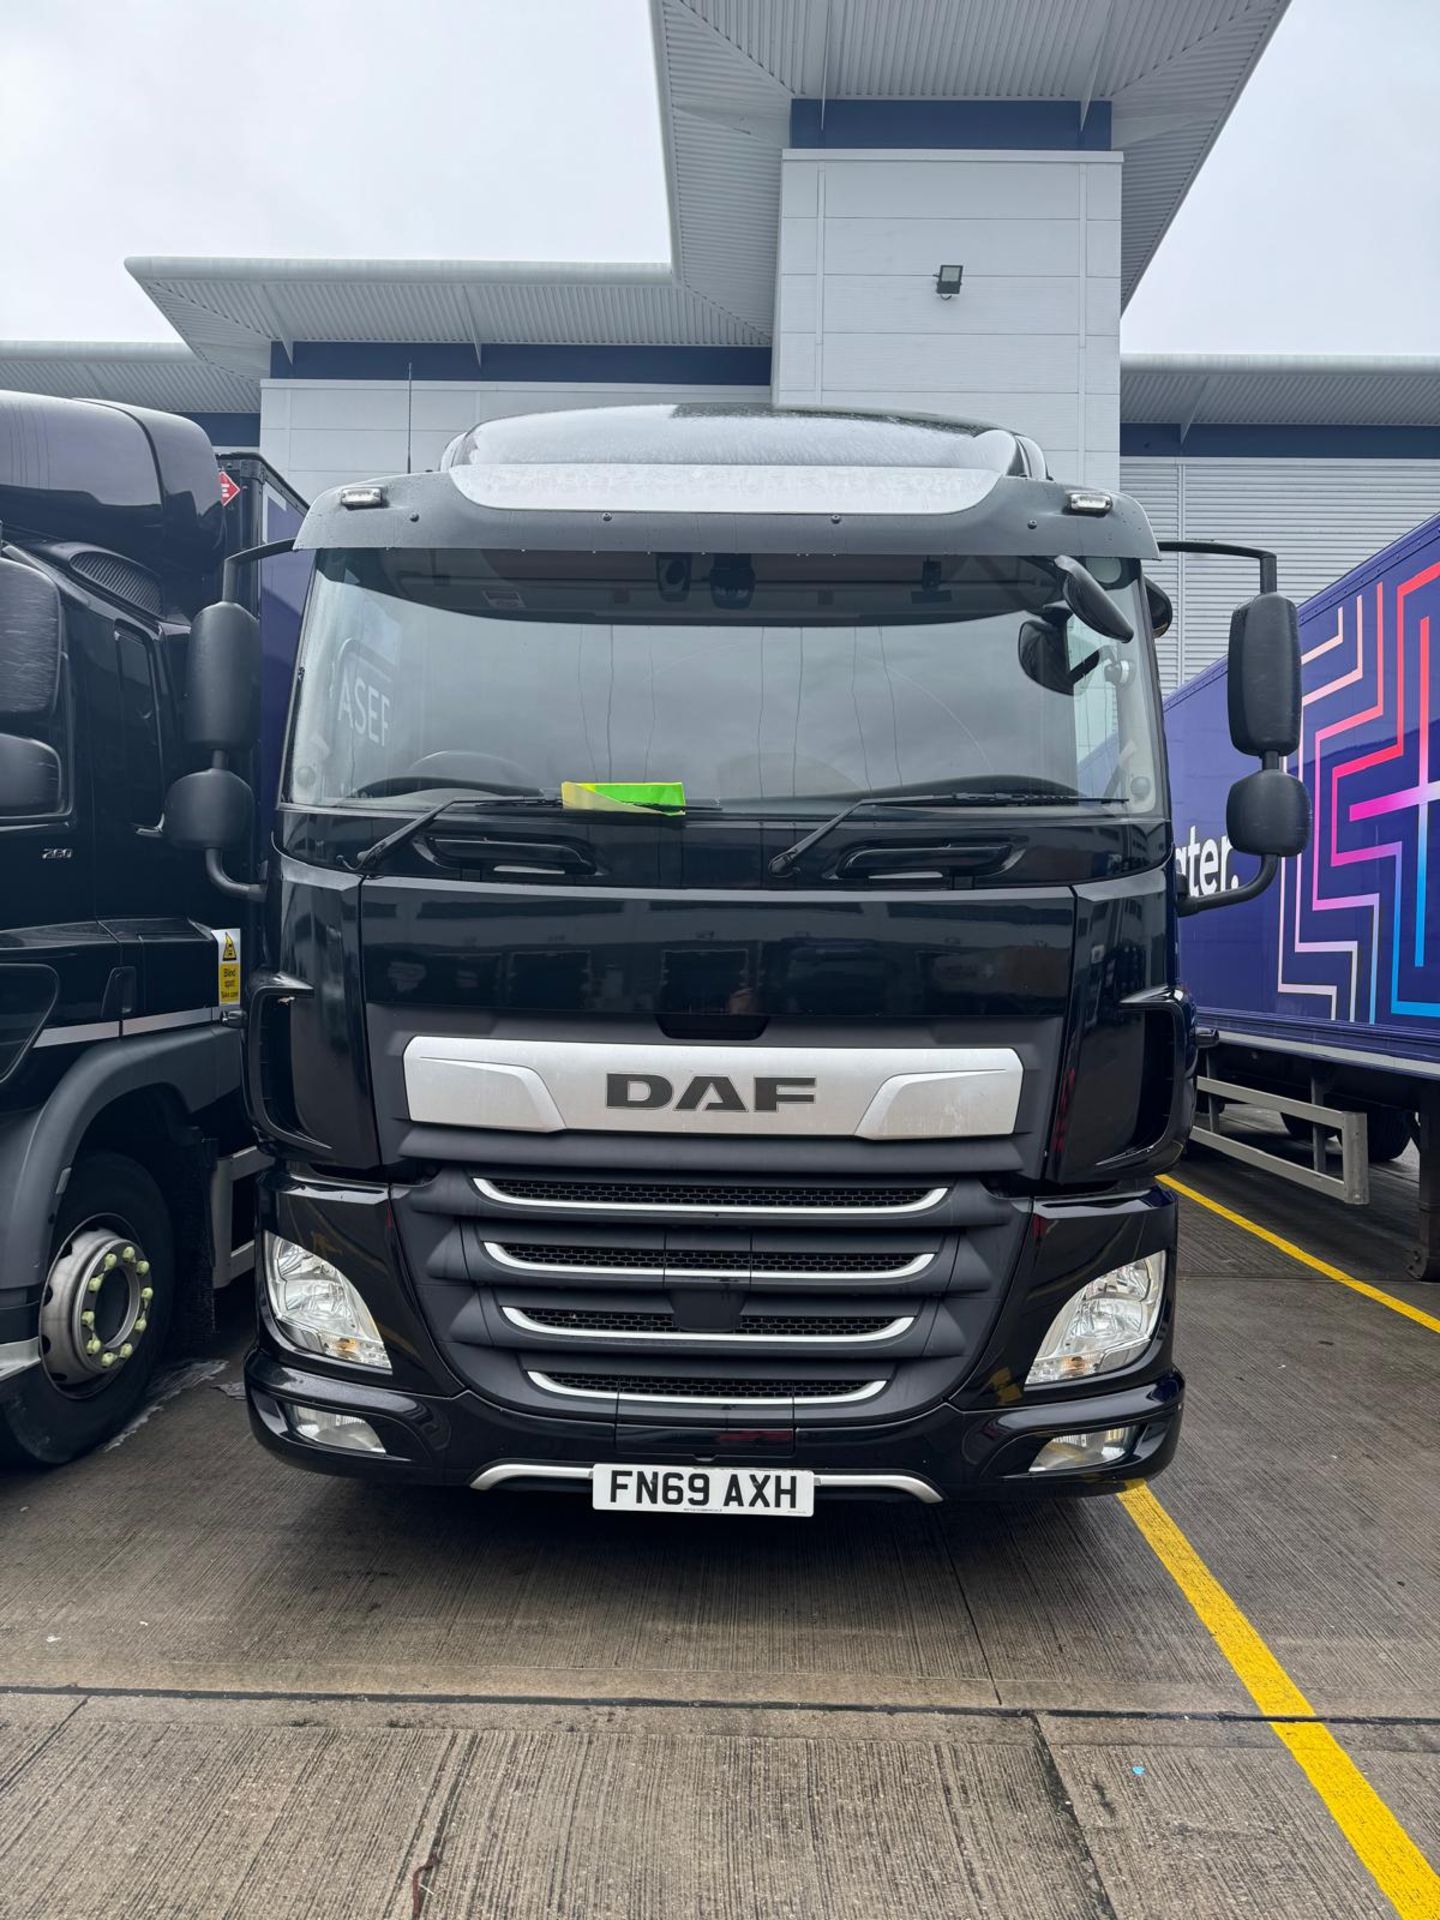 2019, DAF CF 260 FA (Ex-Fleet Owned & Maintained) - FN69 AXH (18 Ton Rigid Truck with Tail Lift) - Image 5 of 22